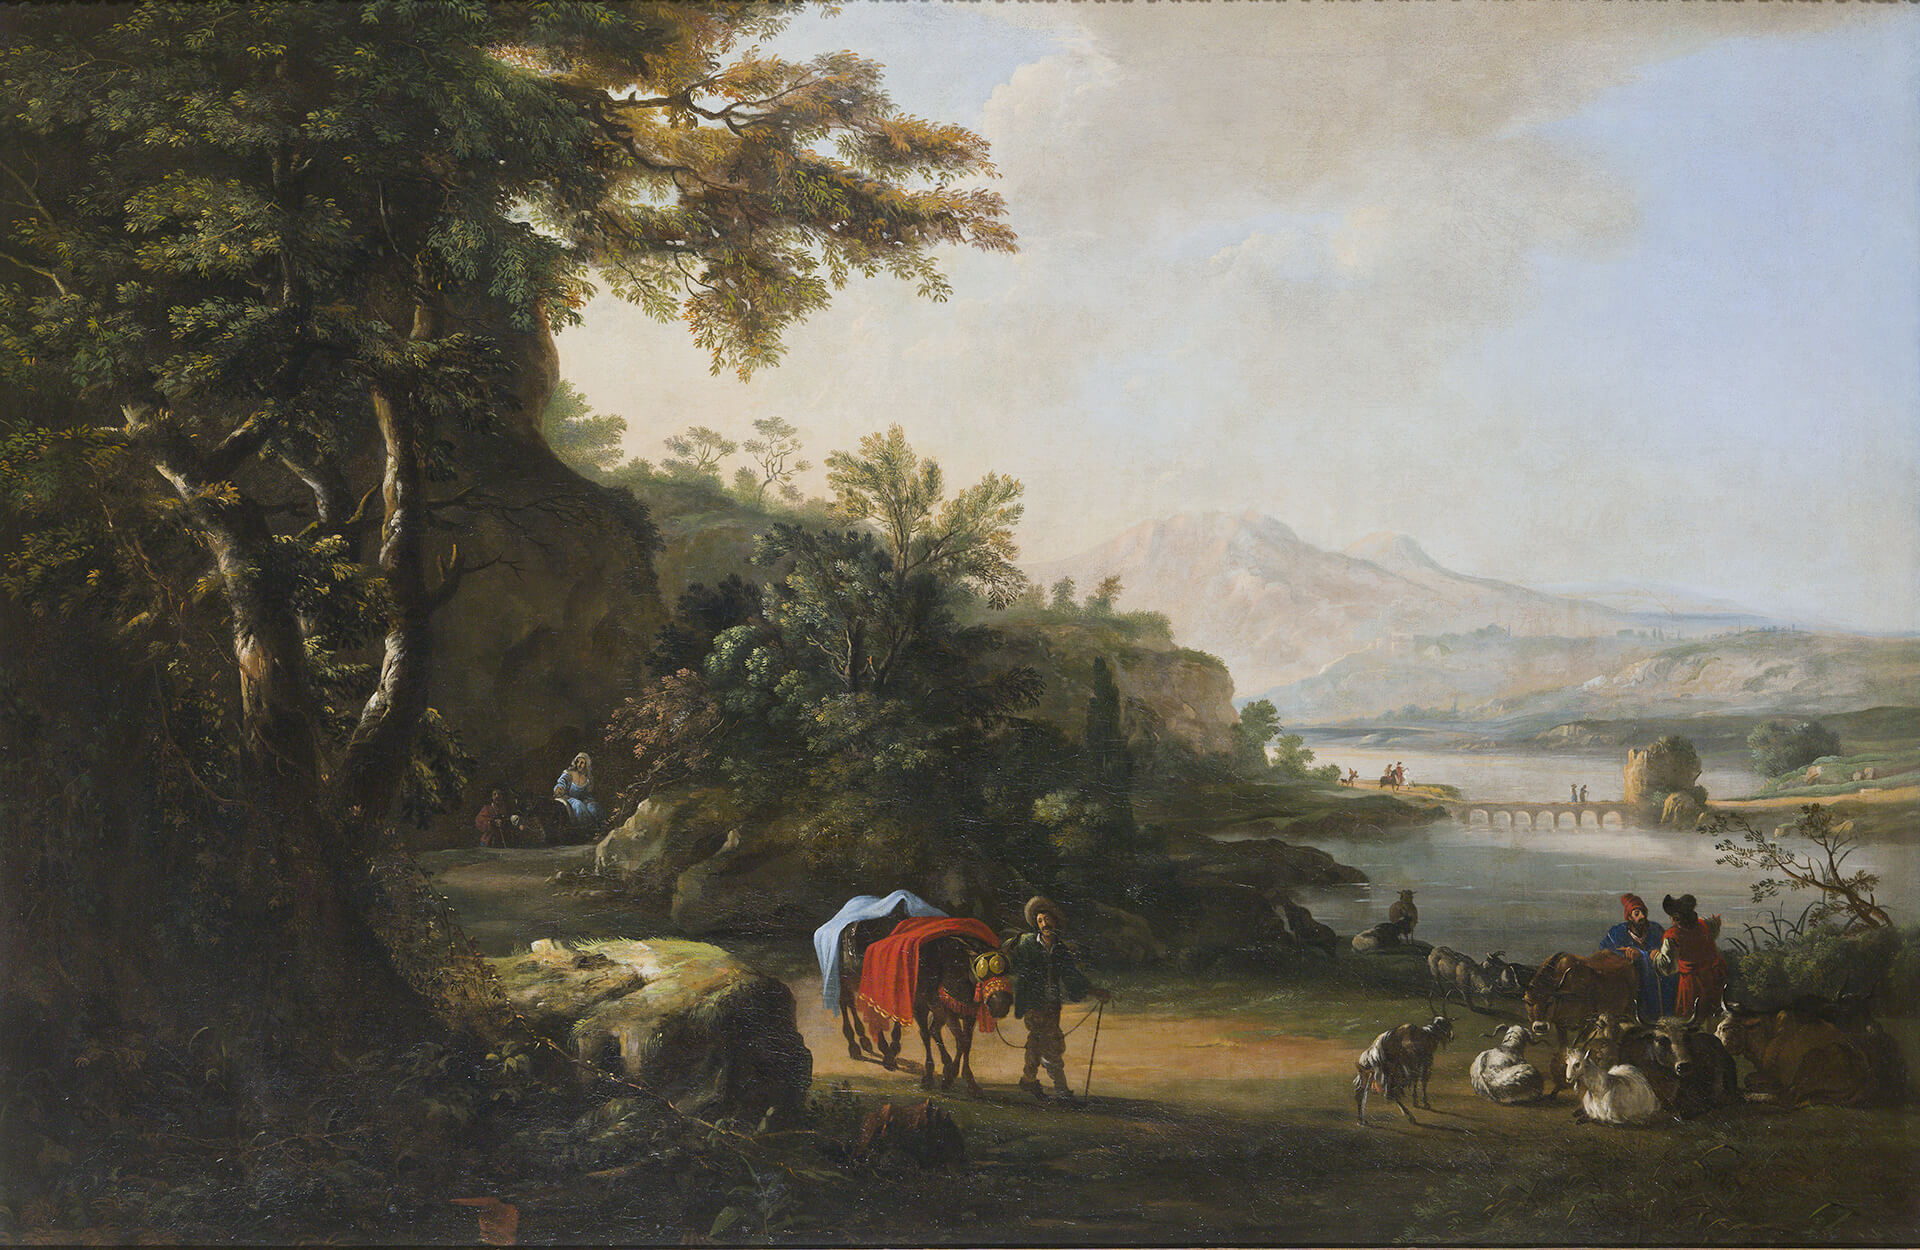 Landscape with a traveller and two donkeys near a stream